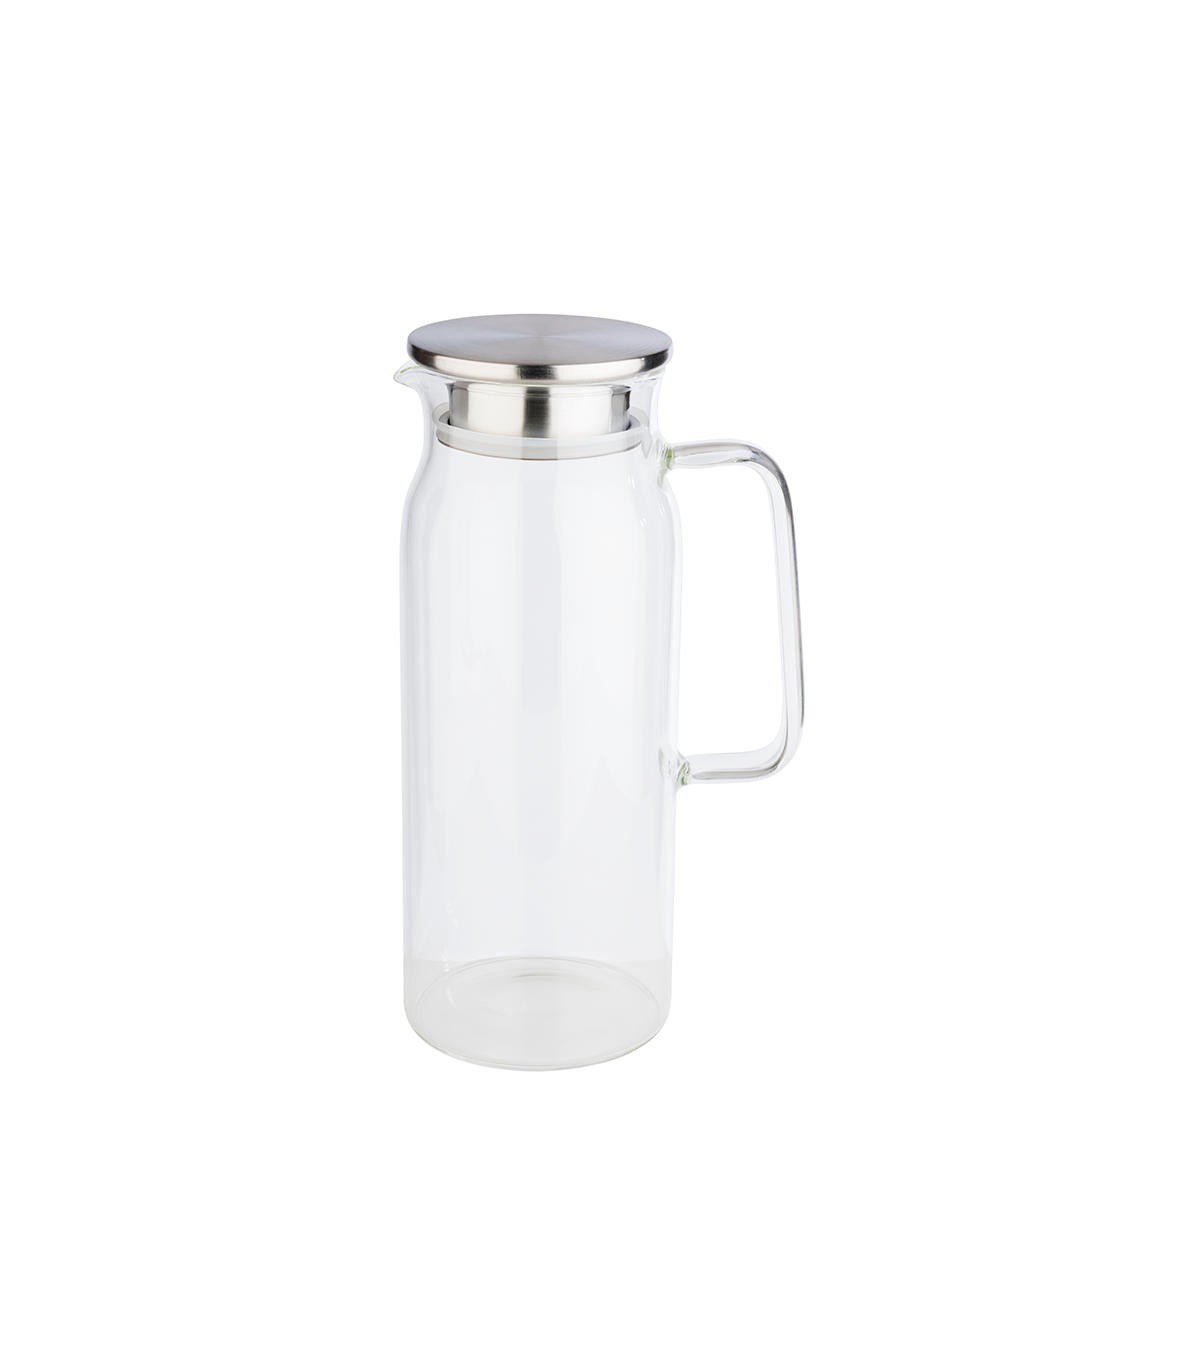 Glass carafe with stainless steel strainer lid : Stellinox